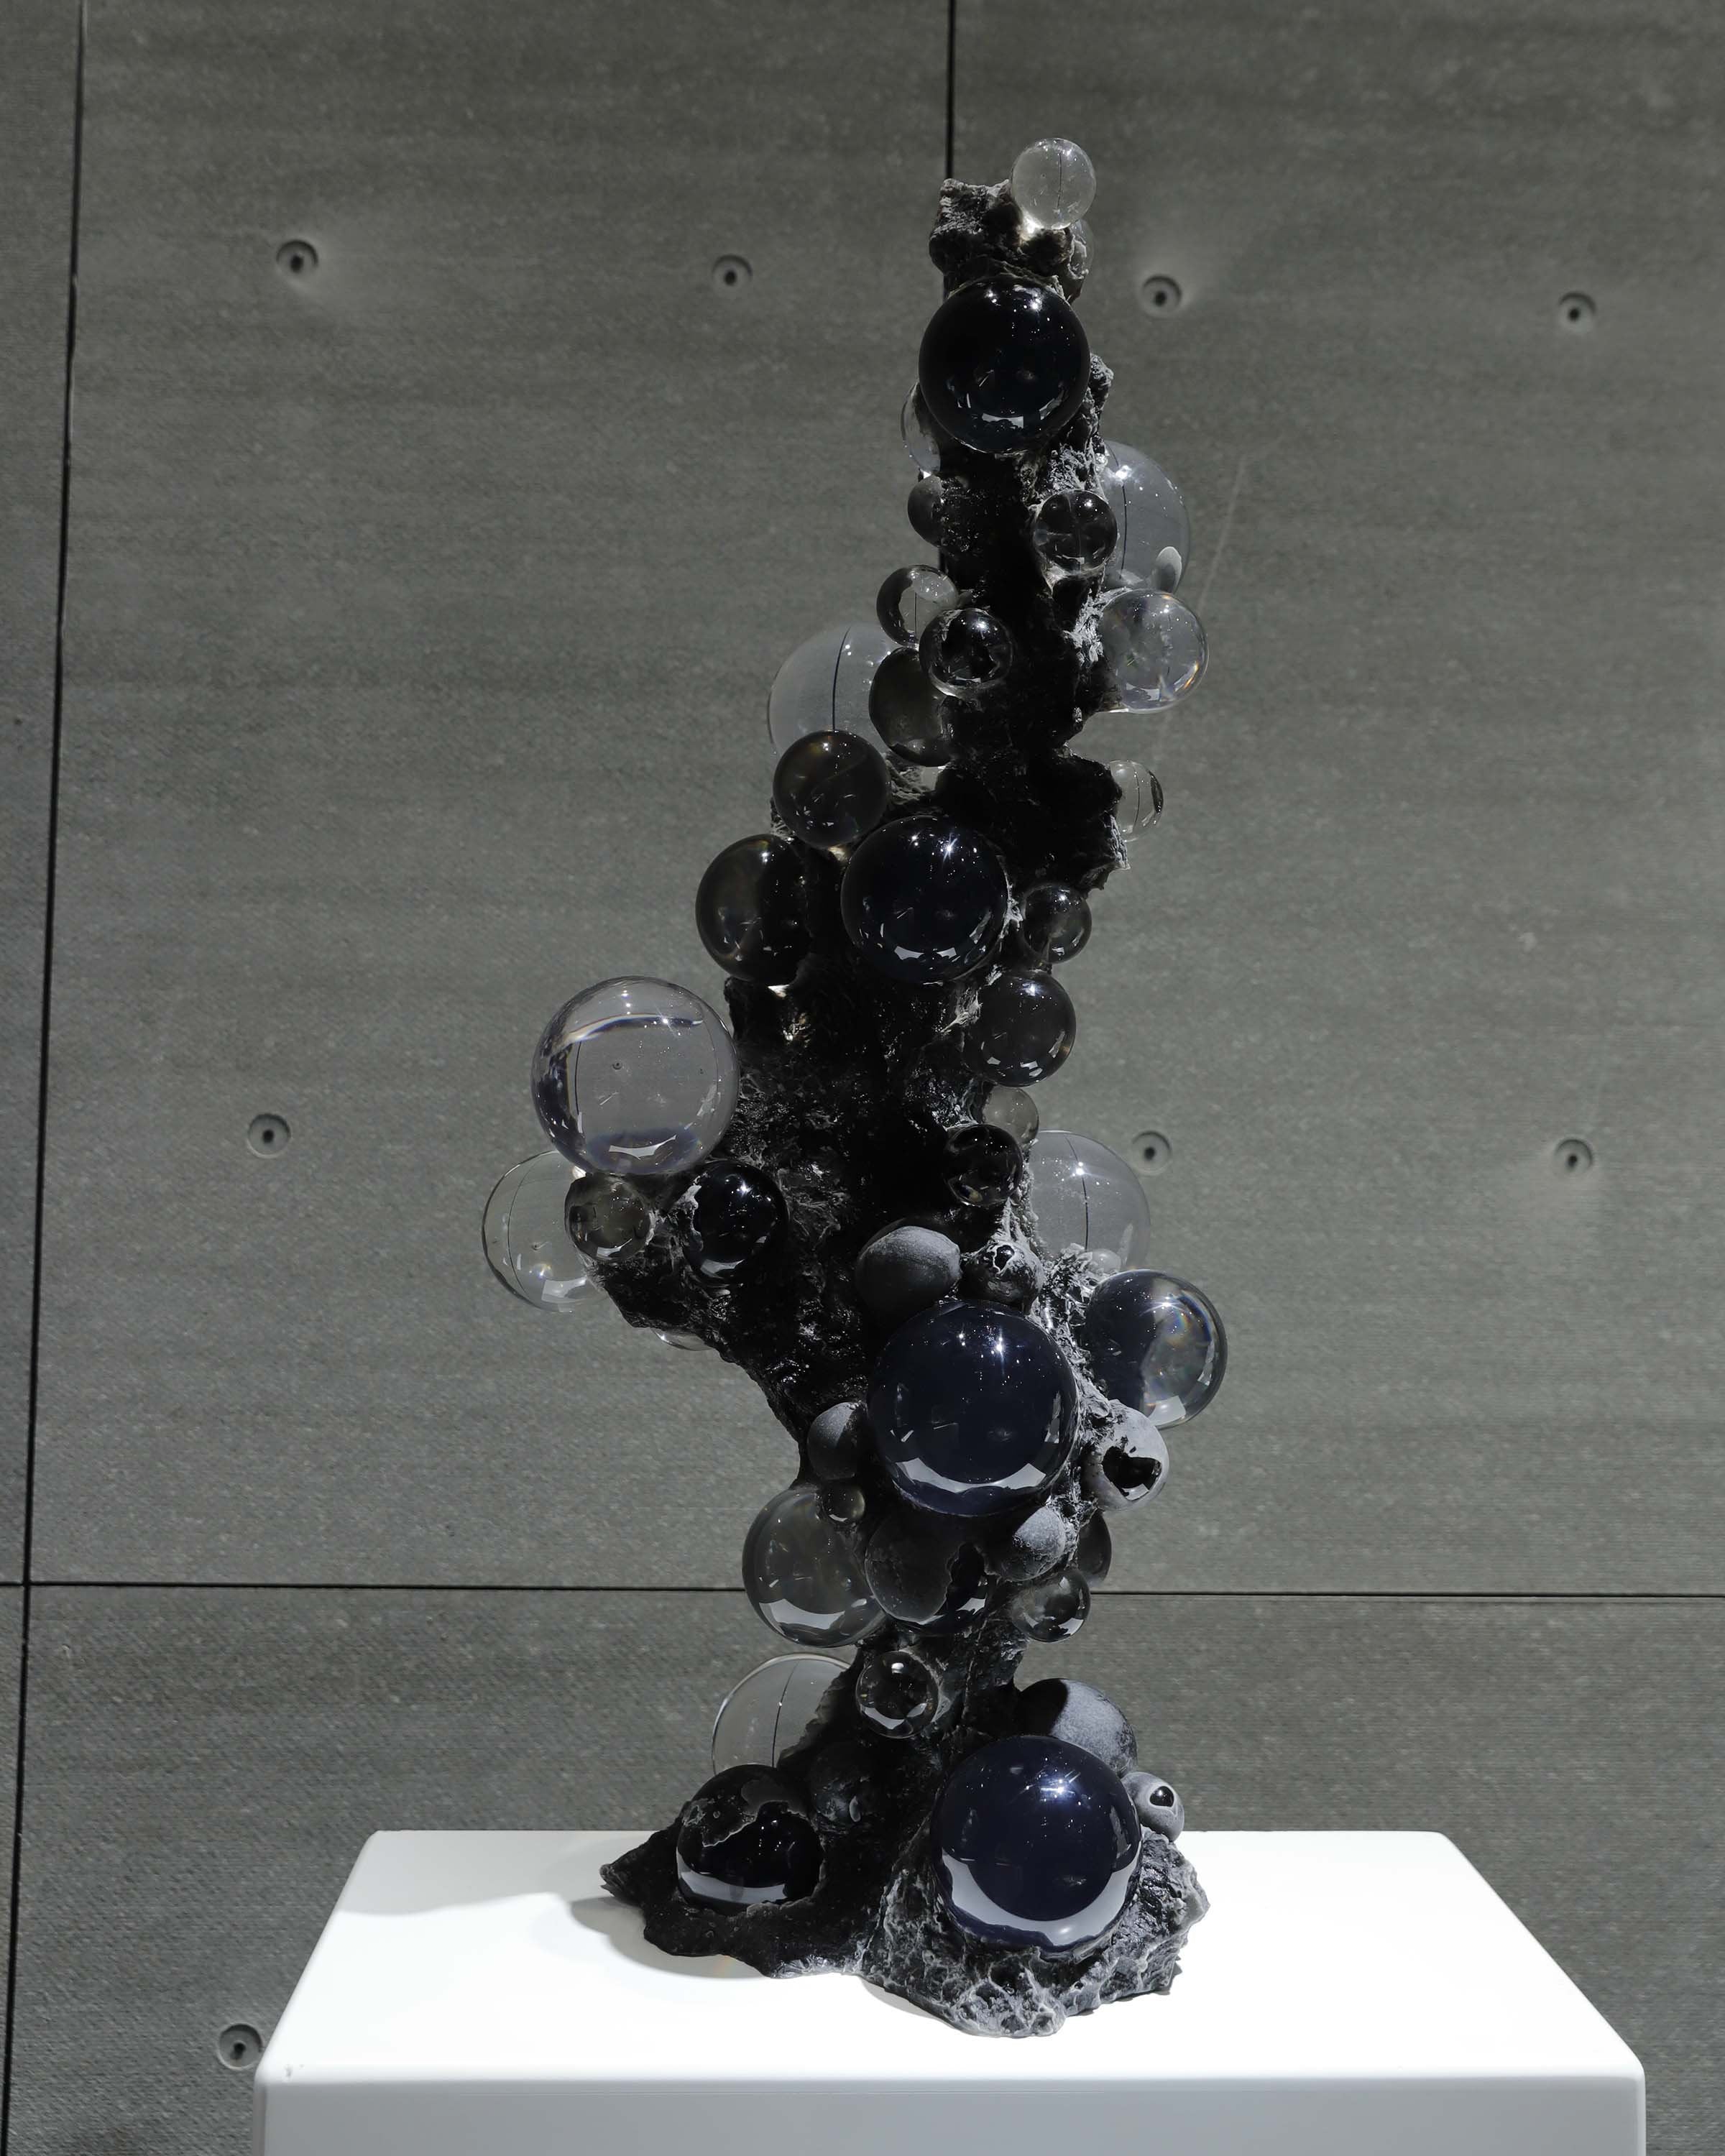 Beautiful High-Quality Crystal Black Indian Sculpture Online